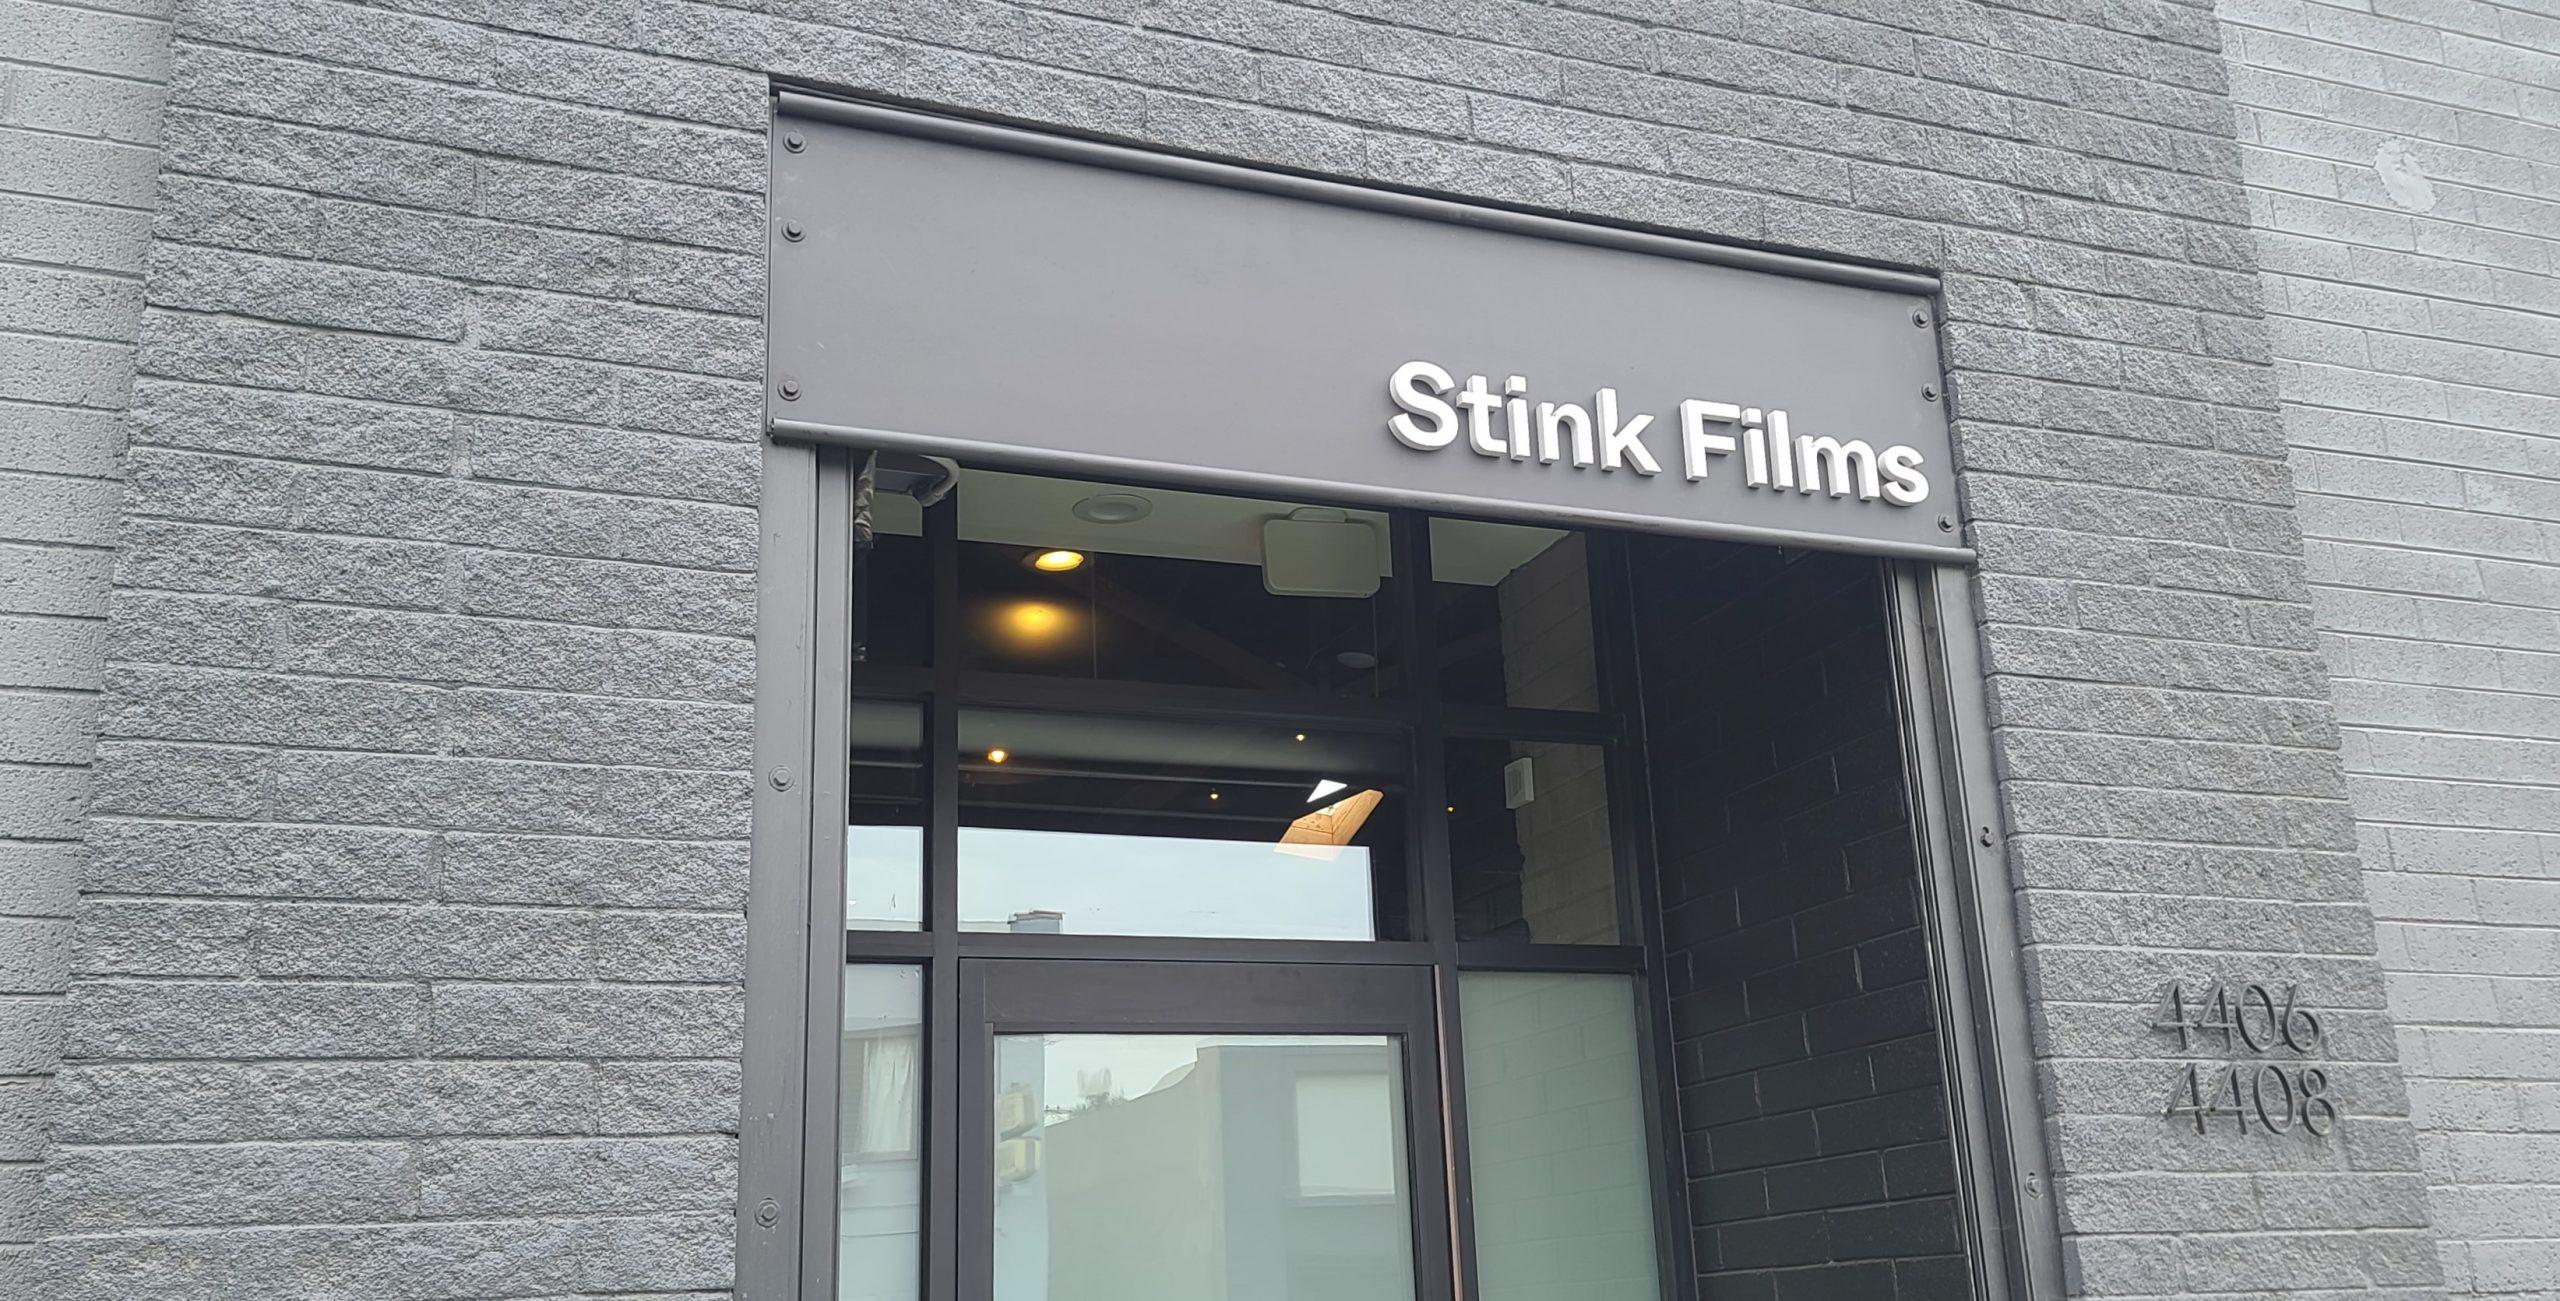 Stink Films has just gotten this impressive entrance sign. We fabricated and installed these metal letters for their Los Angeles location.